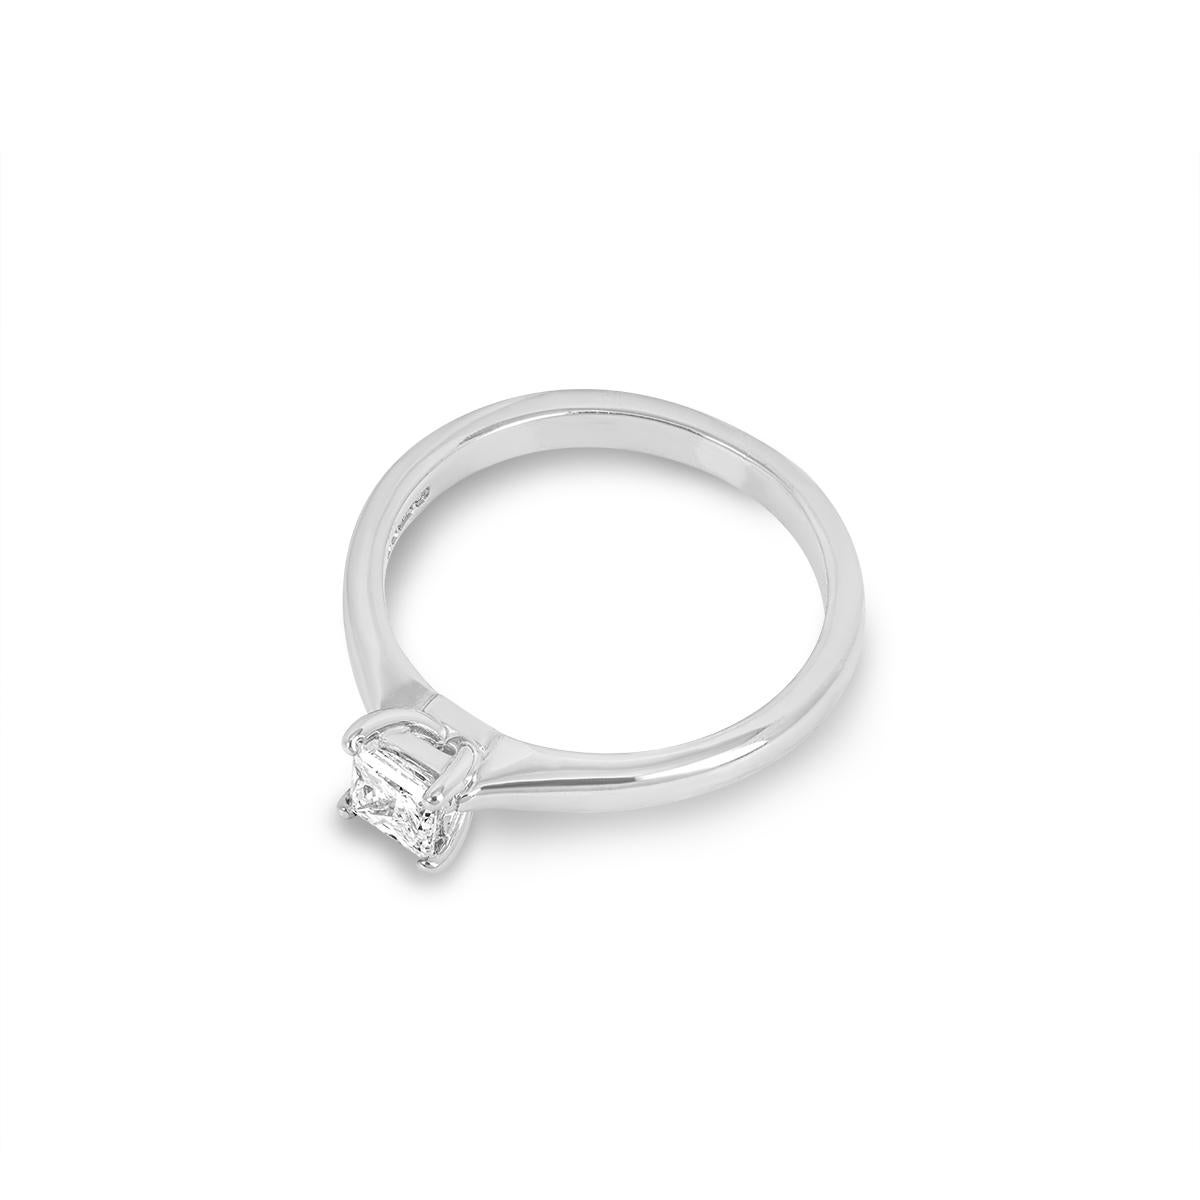 White Gold Princess Cut Diamond Ring 0.30ct H/VS1 In Excellent Condition For Sale In London, GB